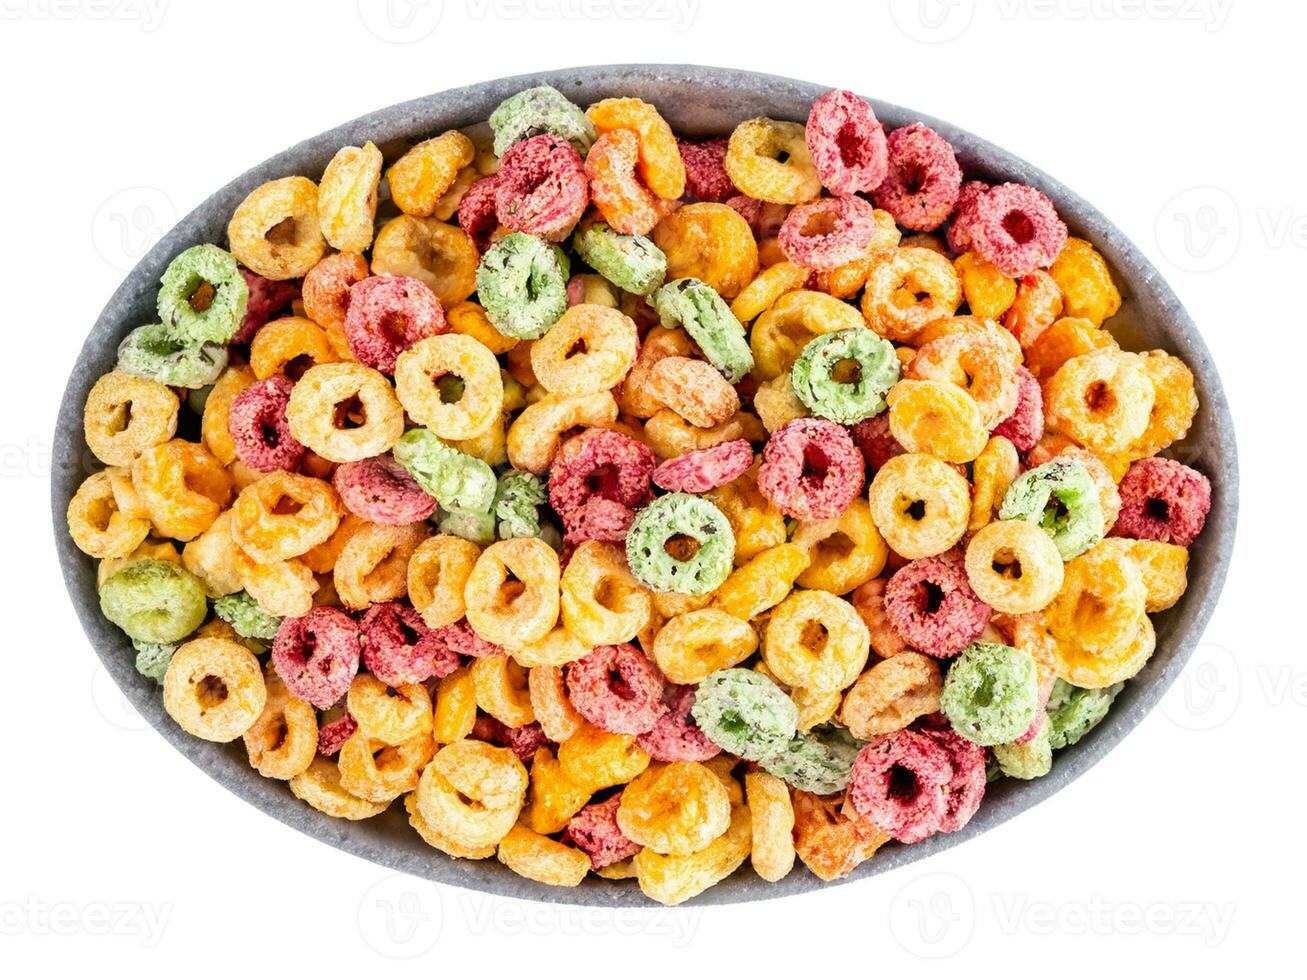 bowl of cereal rings on white background. photo